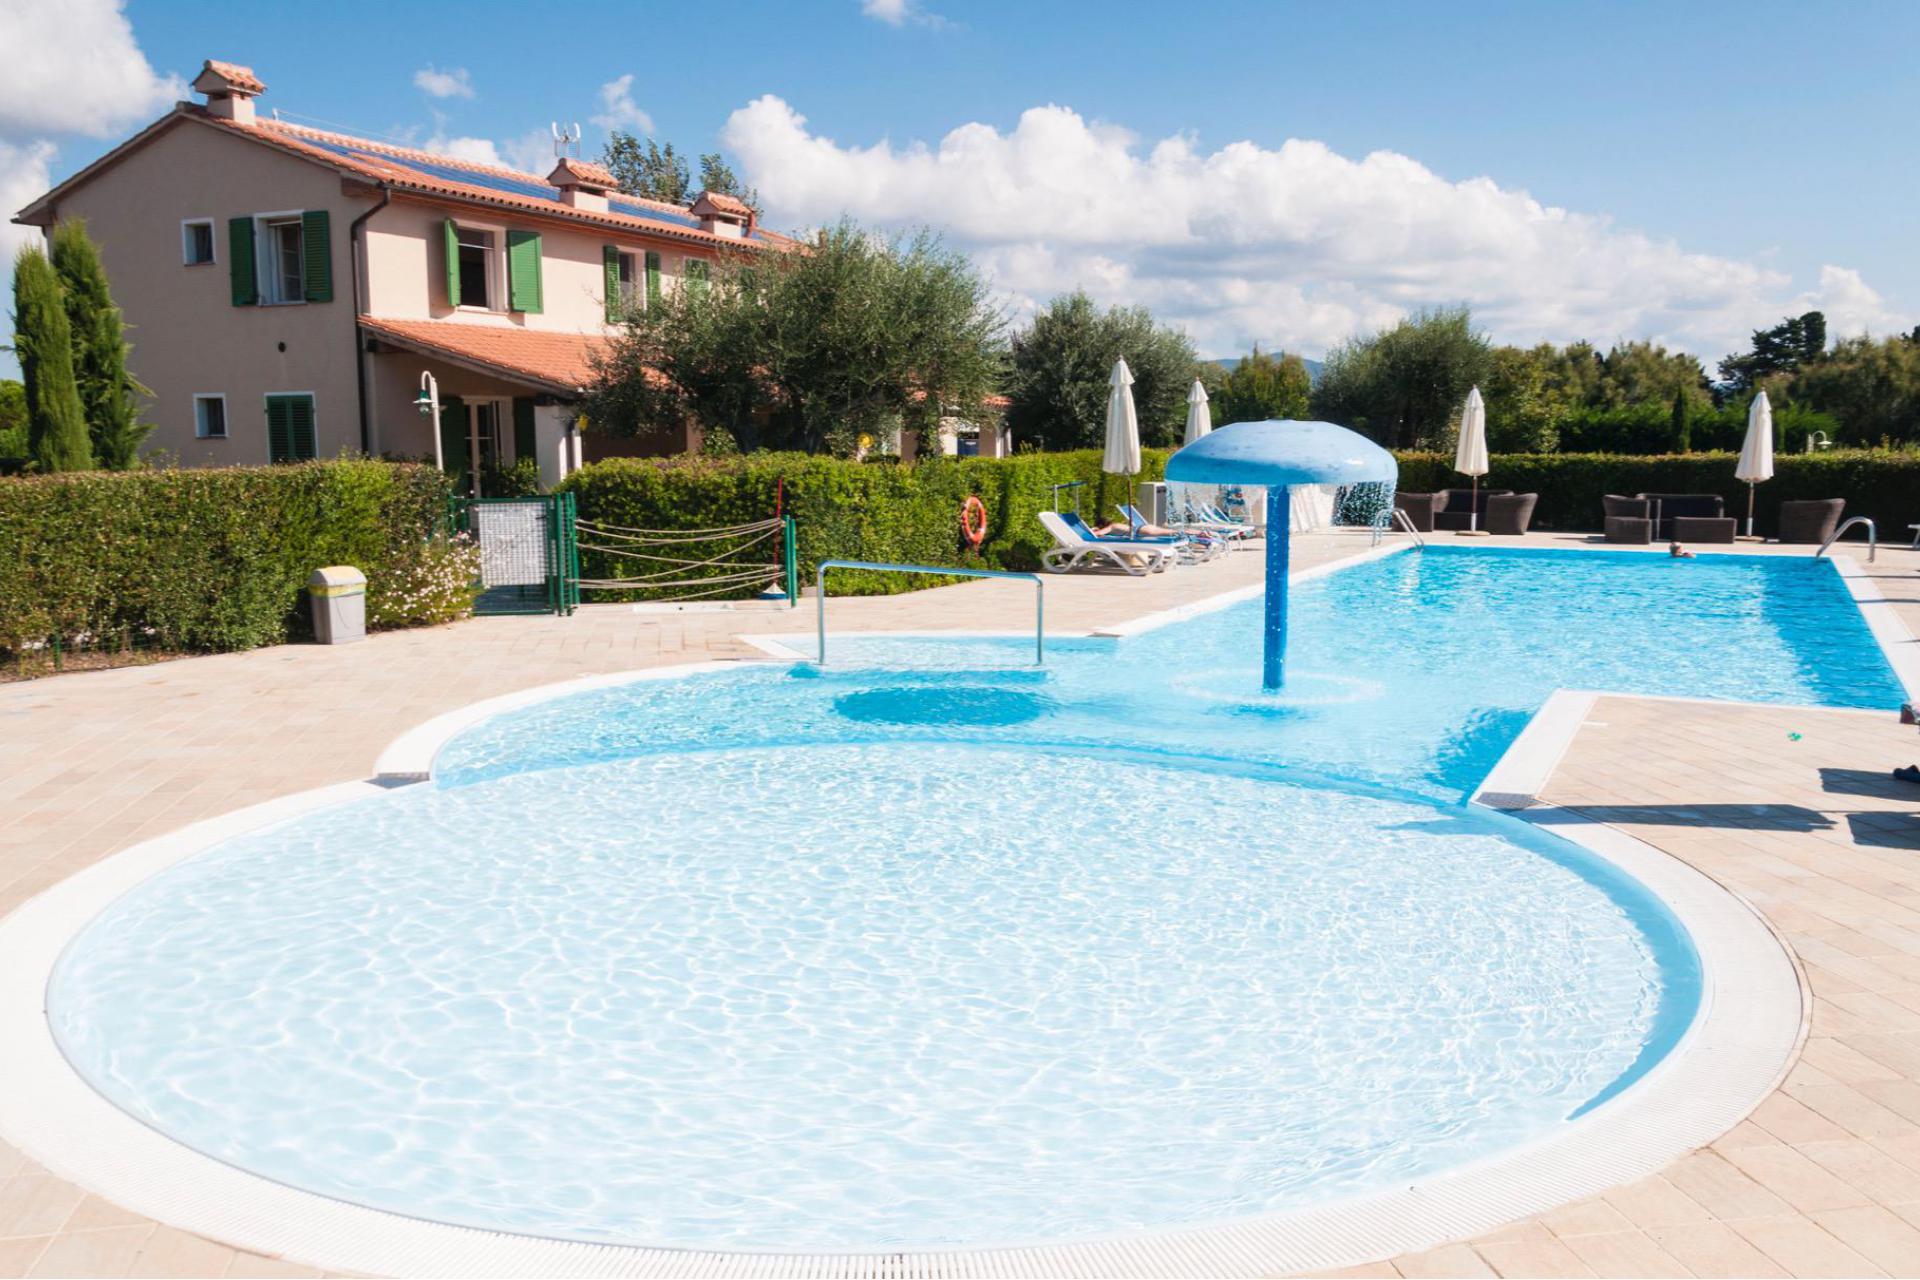 Perfect agriturismo for a holiday with children